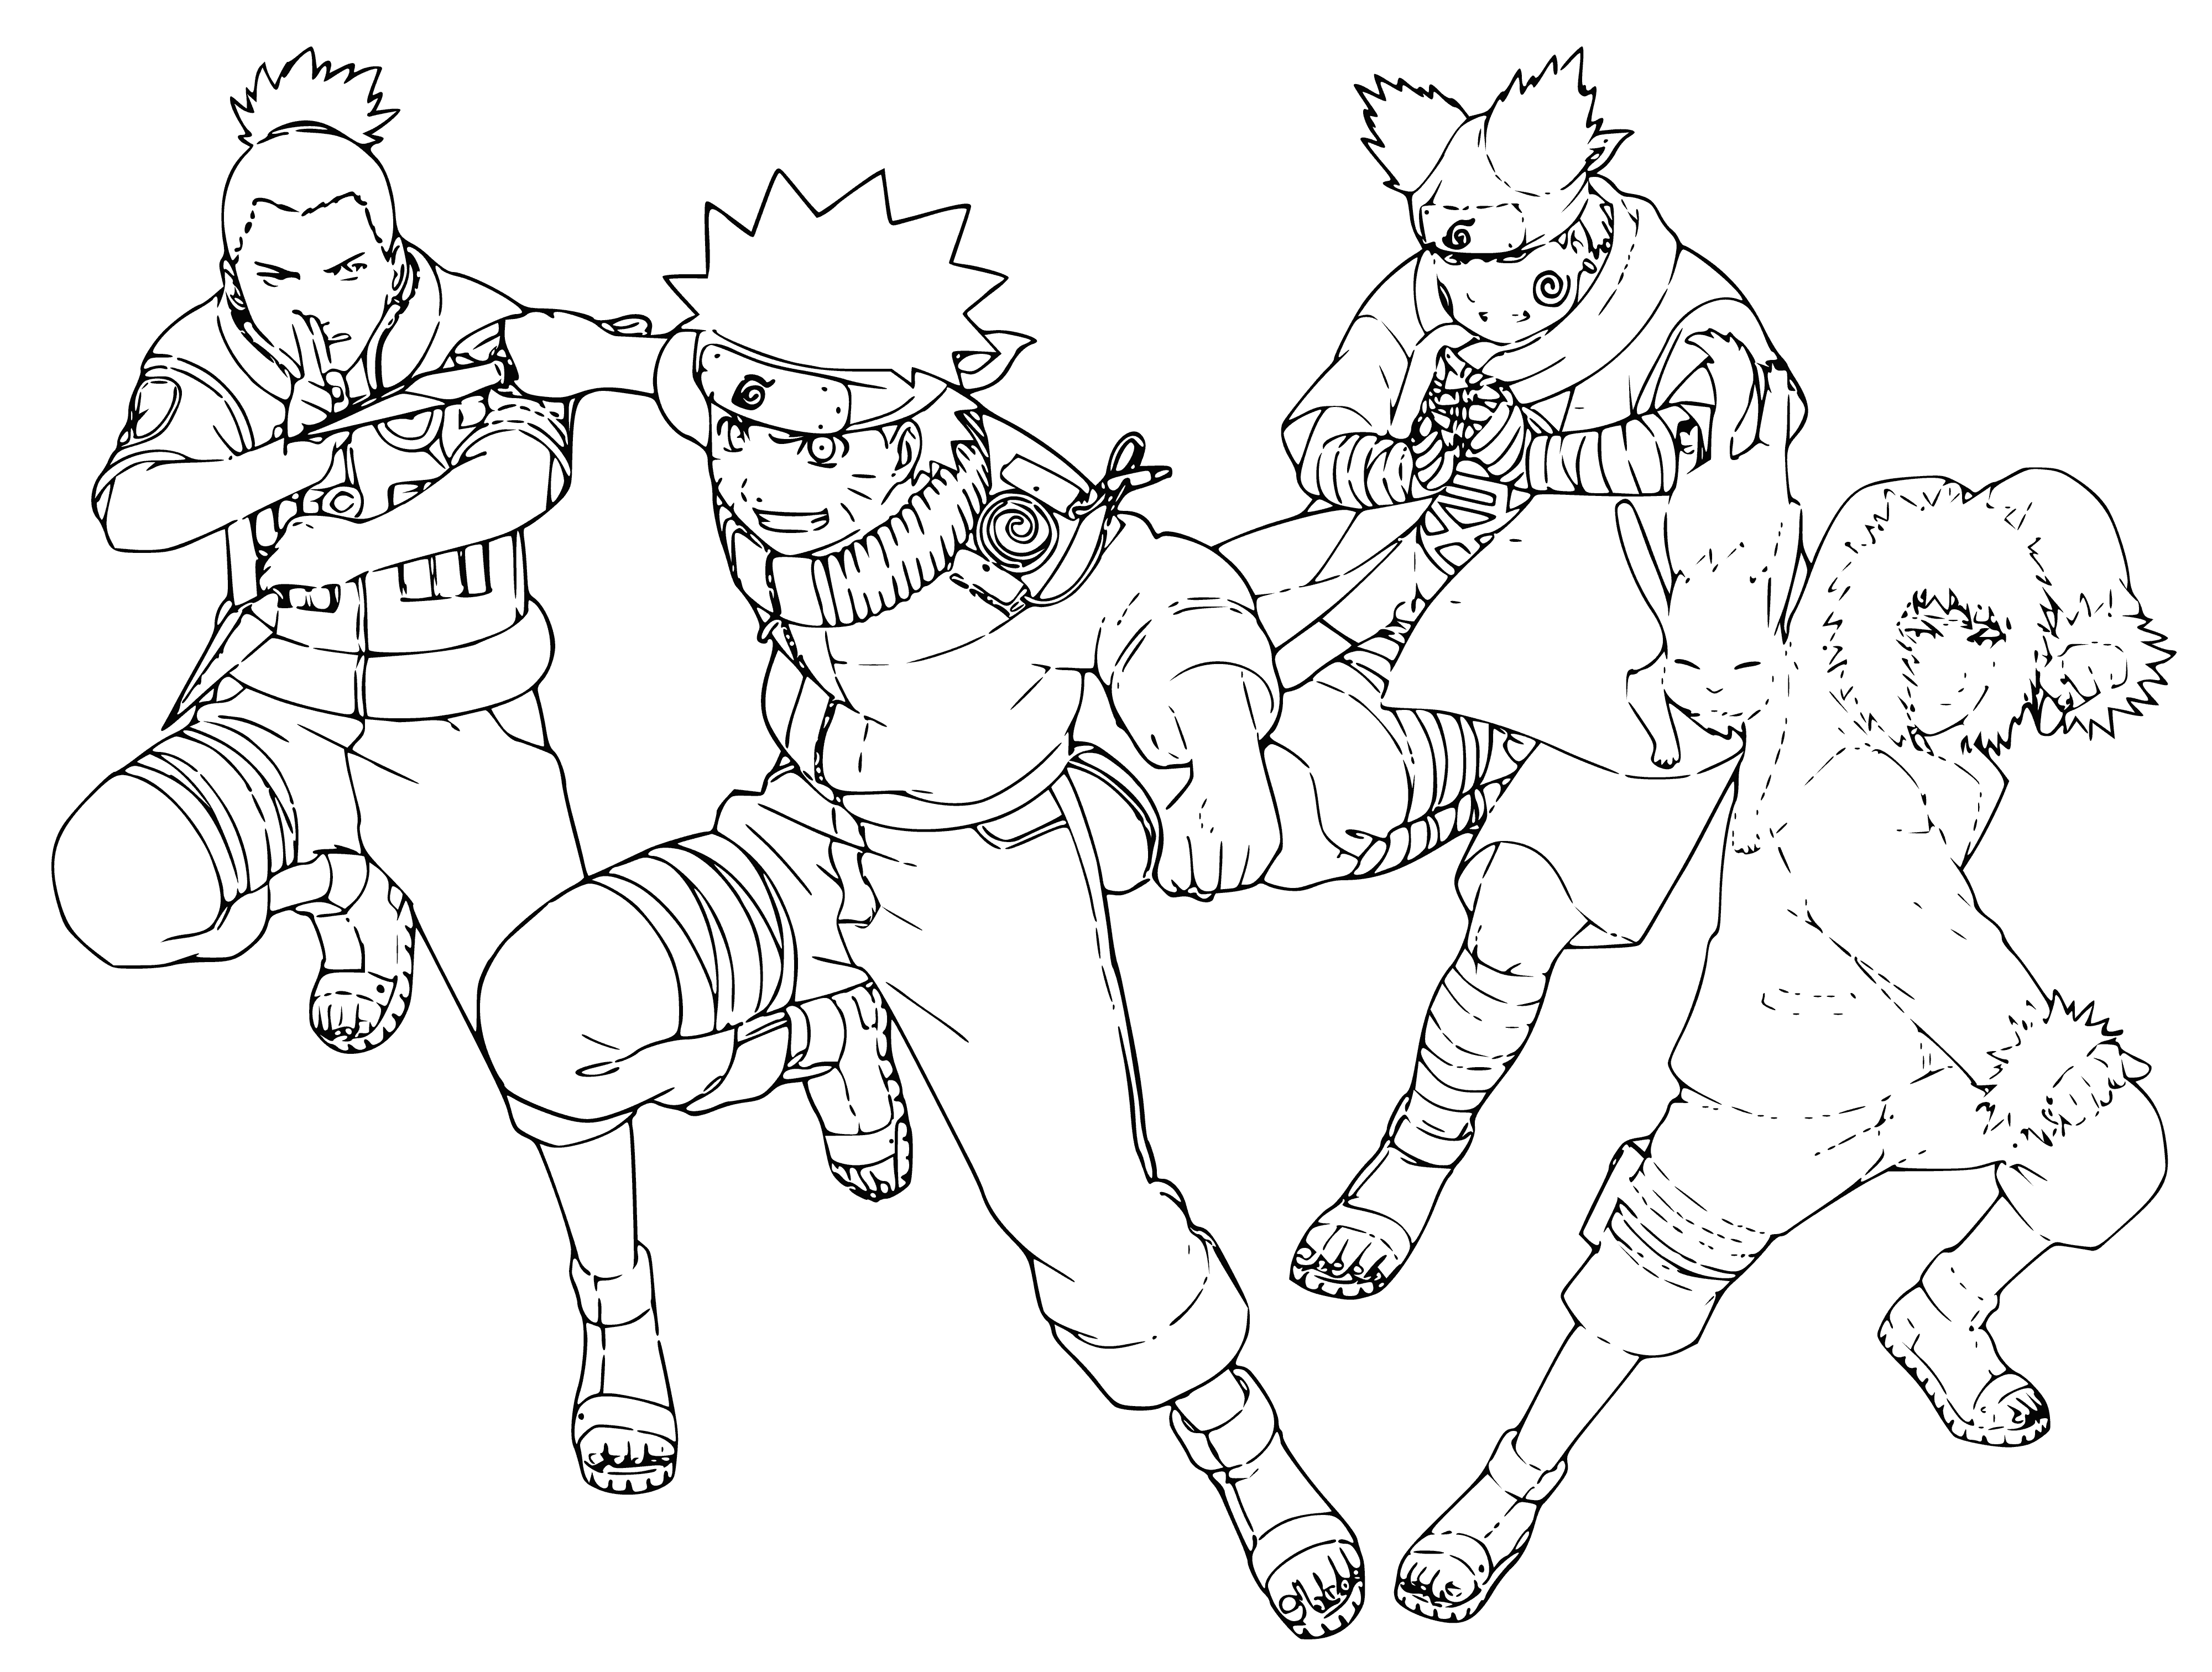 Naruto anime characters coloring page